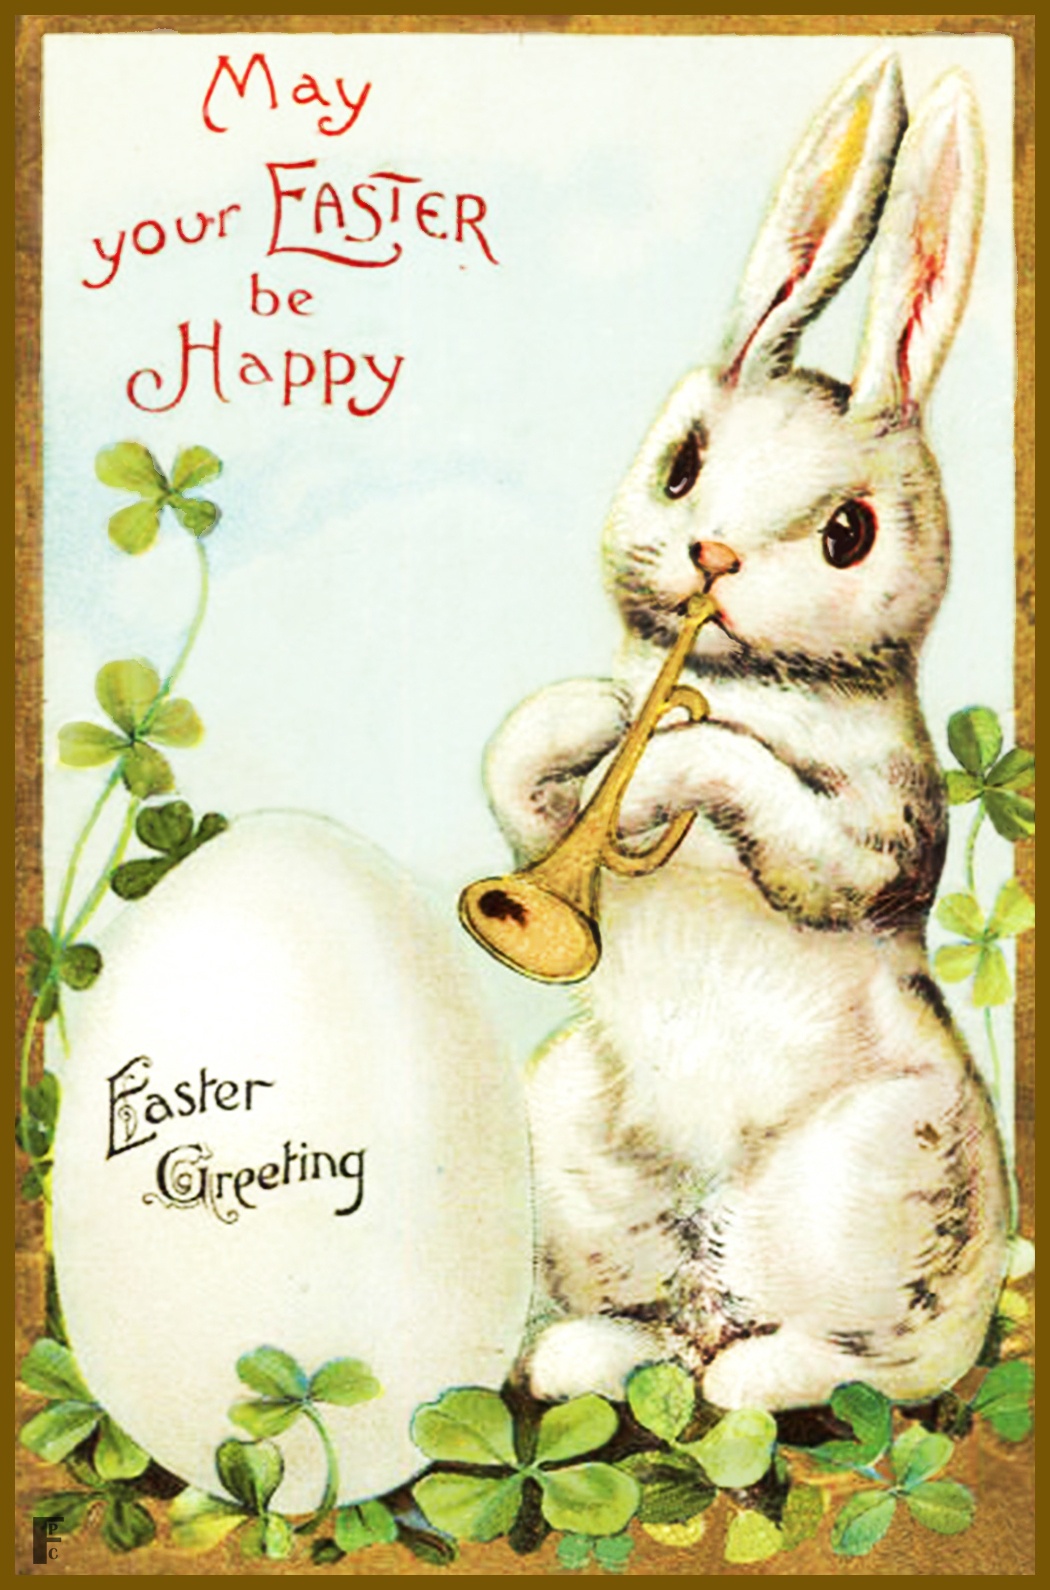 Free Printable Easter Greeting Cards – Hd Easter Images - Printable Easter Greeting Cards Free